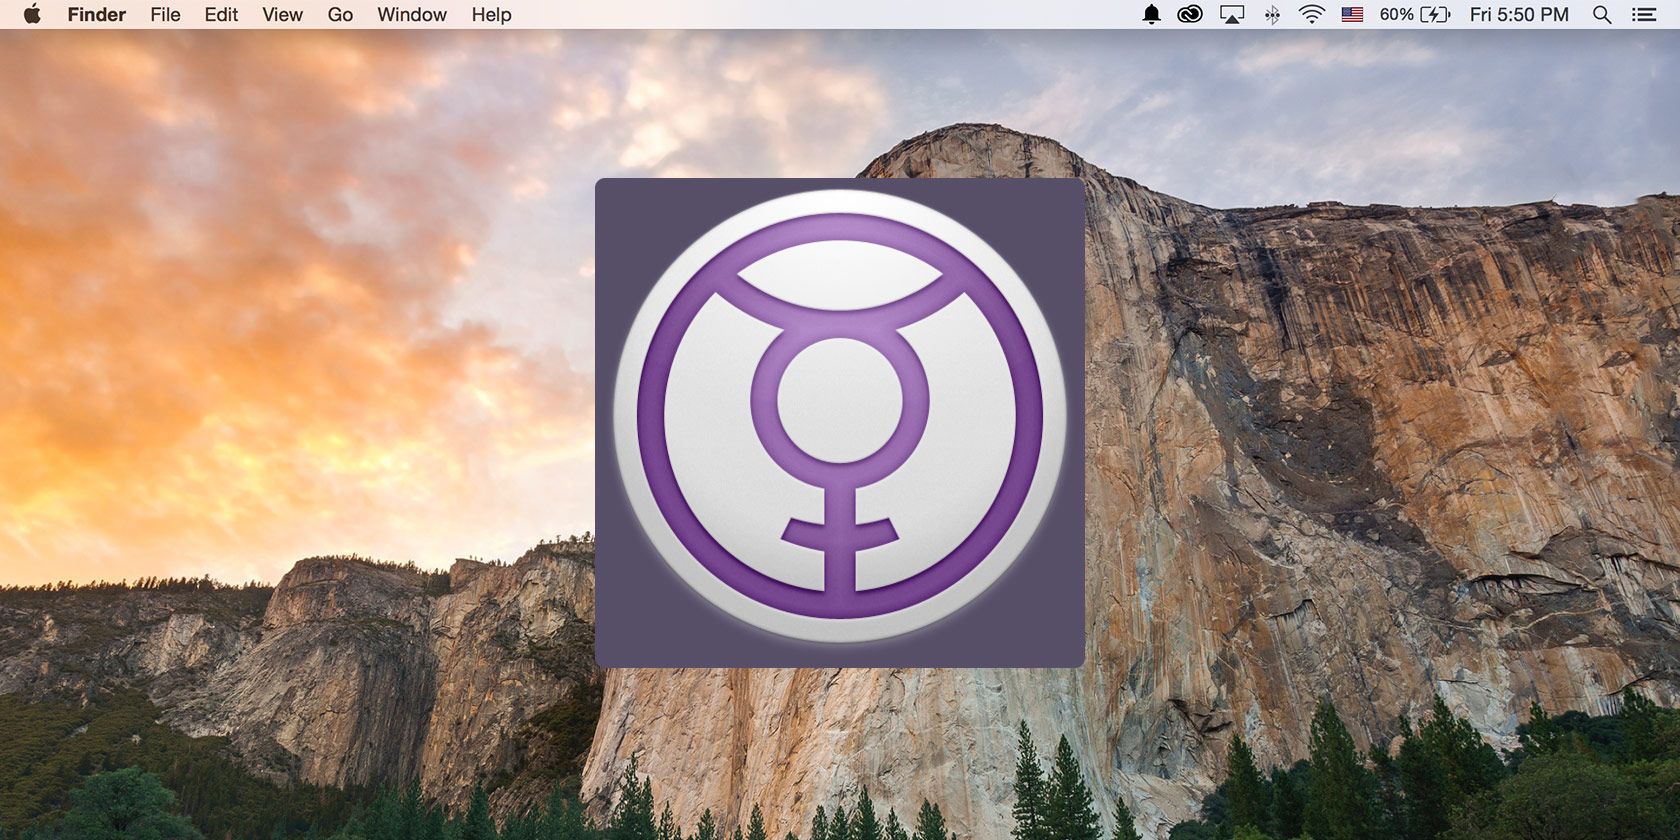 quicksilver for mac review